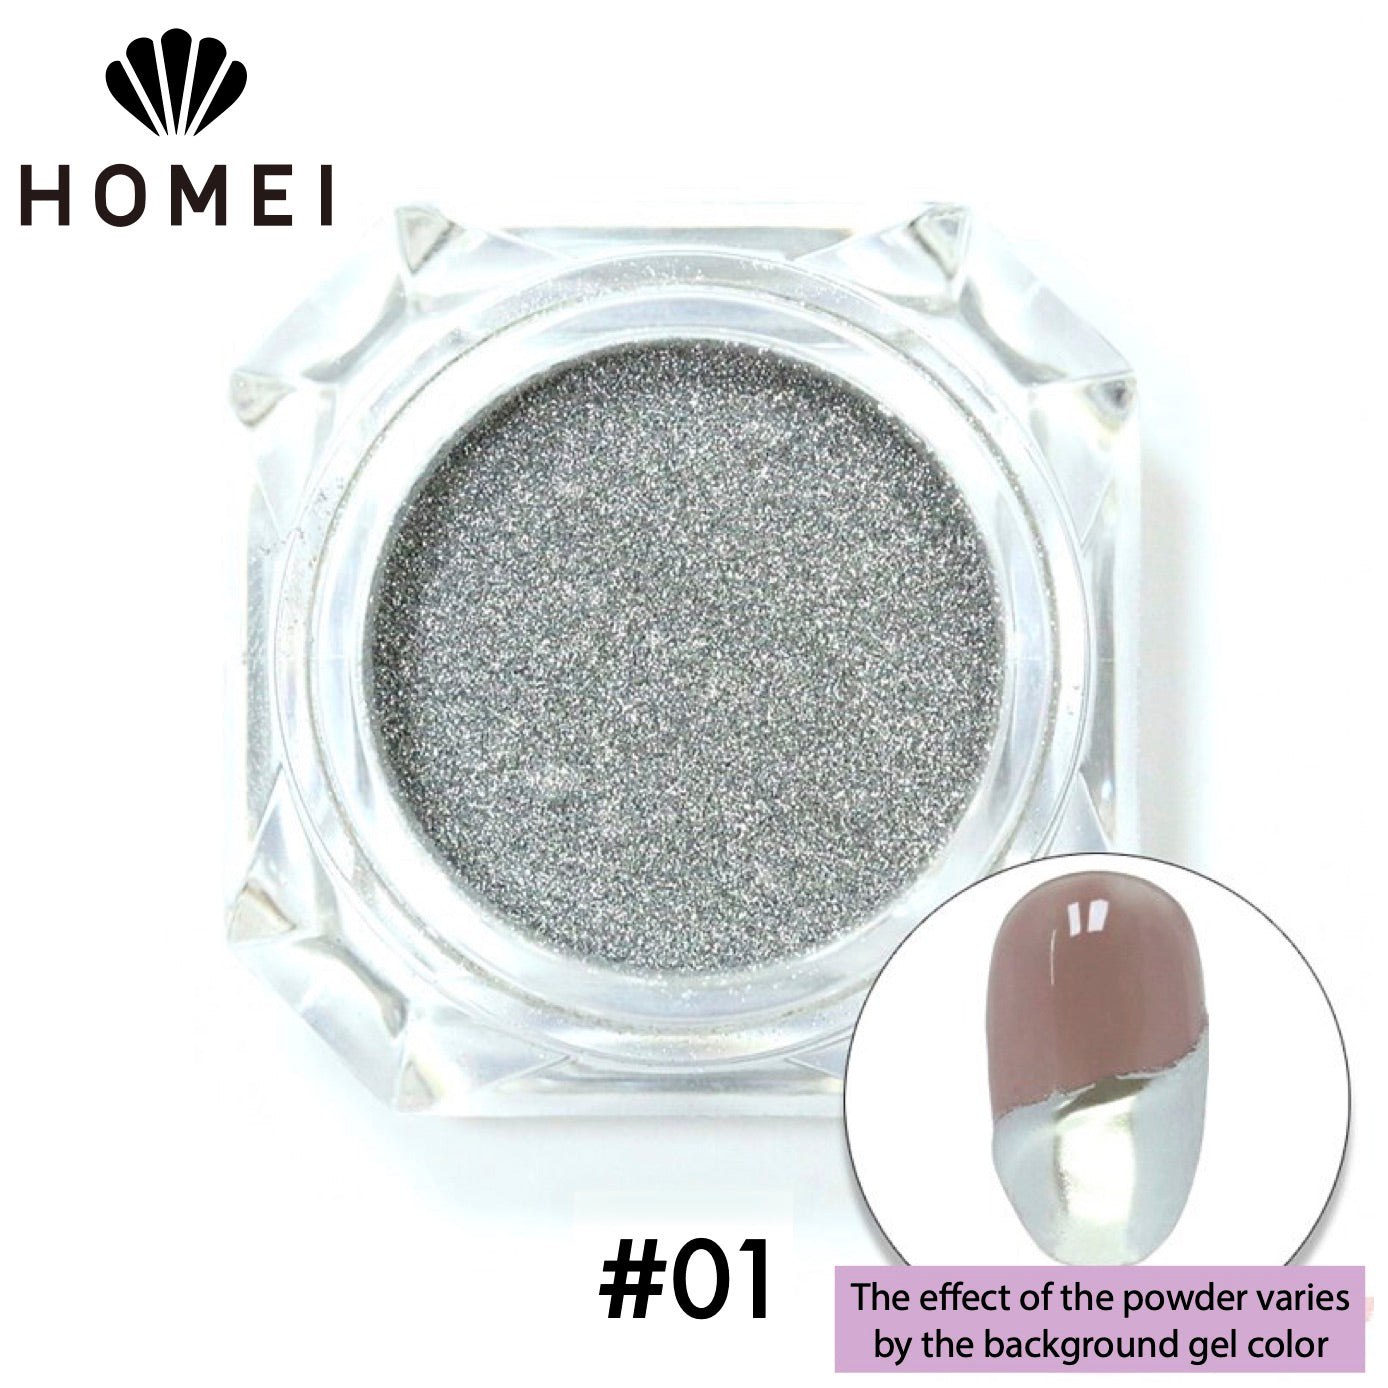 HOMEI Weekly Gel Mirror Powder product image with finished design on nail chip. Metallic silver.